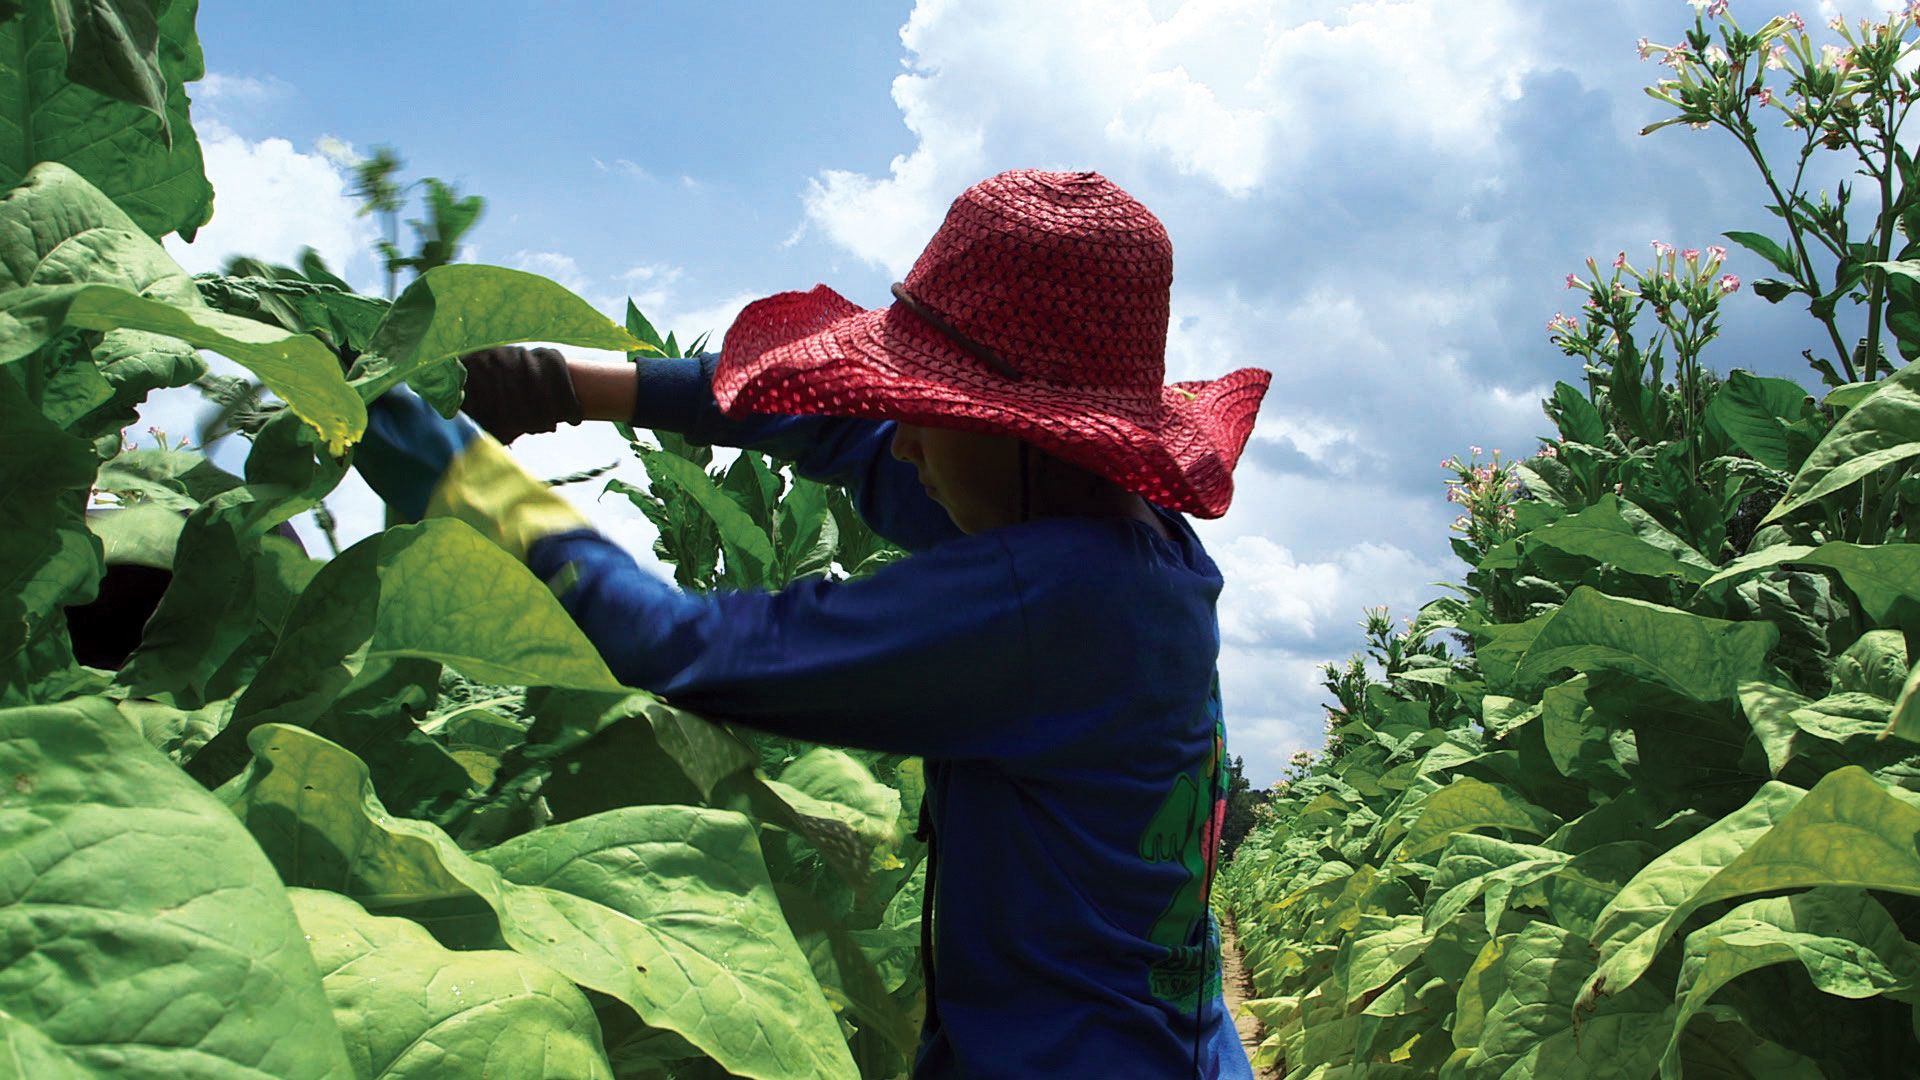 US: Child Workers in Danger on Tobacco Farms